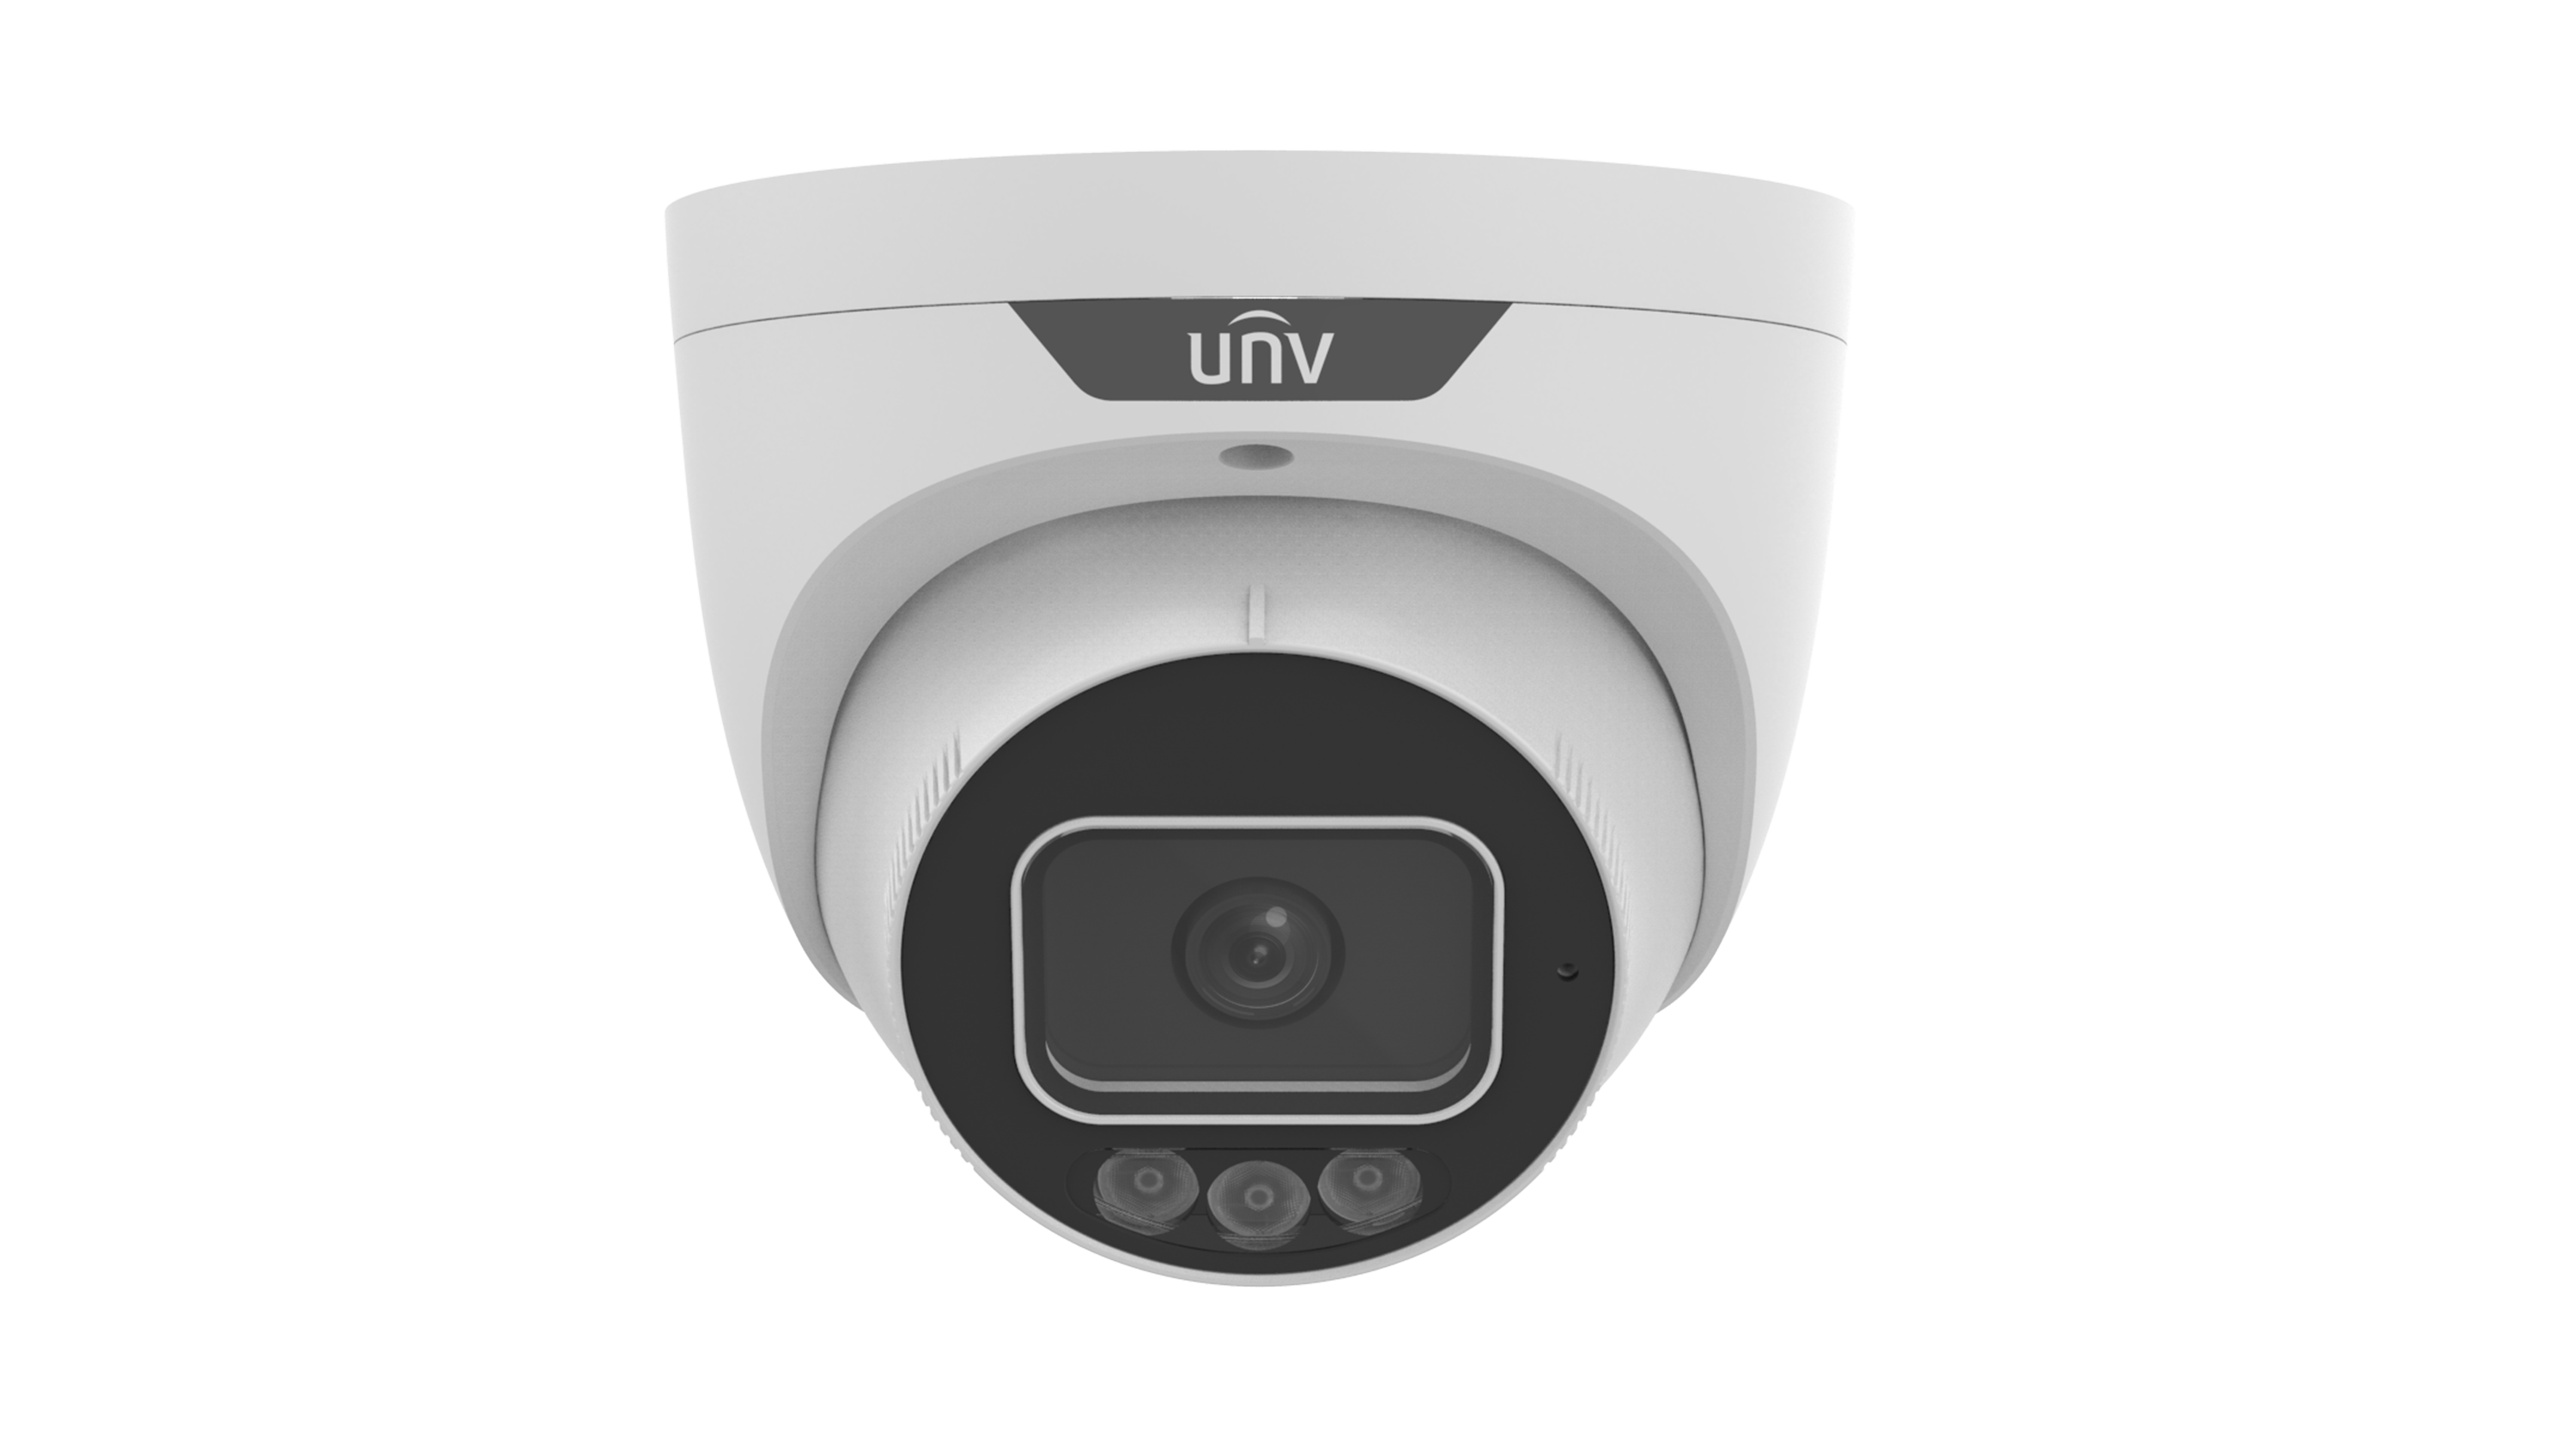 PRIME SERIES IP CAMERA WHITE AI TRIGUARD 8MP/4K H.264/5/5+/ MJPEG TURRET 130 WDR METAL 2.8MM FIXED LENS LIGHT HUNTER IR+WHITE LED 30M POE IP67 BUILT IN MIC AUDIO IN AUDIO OUT 1 x ALARM IN 1 x ALARM OUT SUPPORT UP TO 256GB SD 12VDC